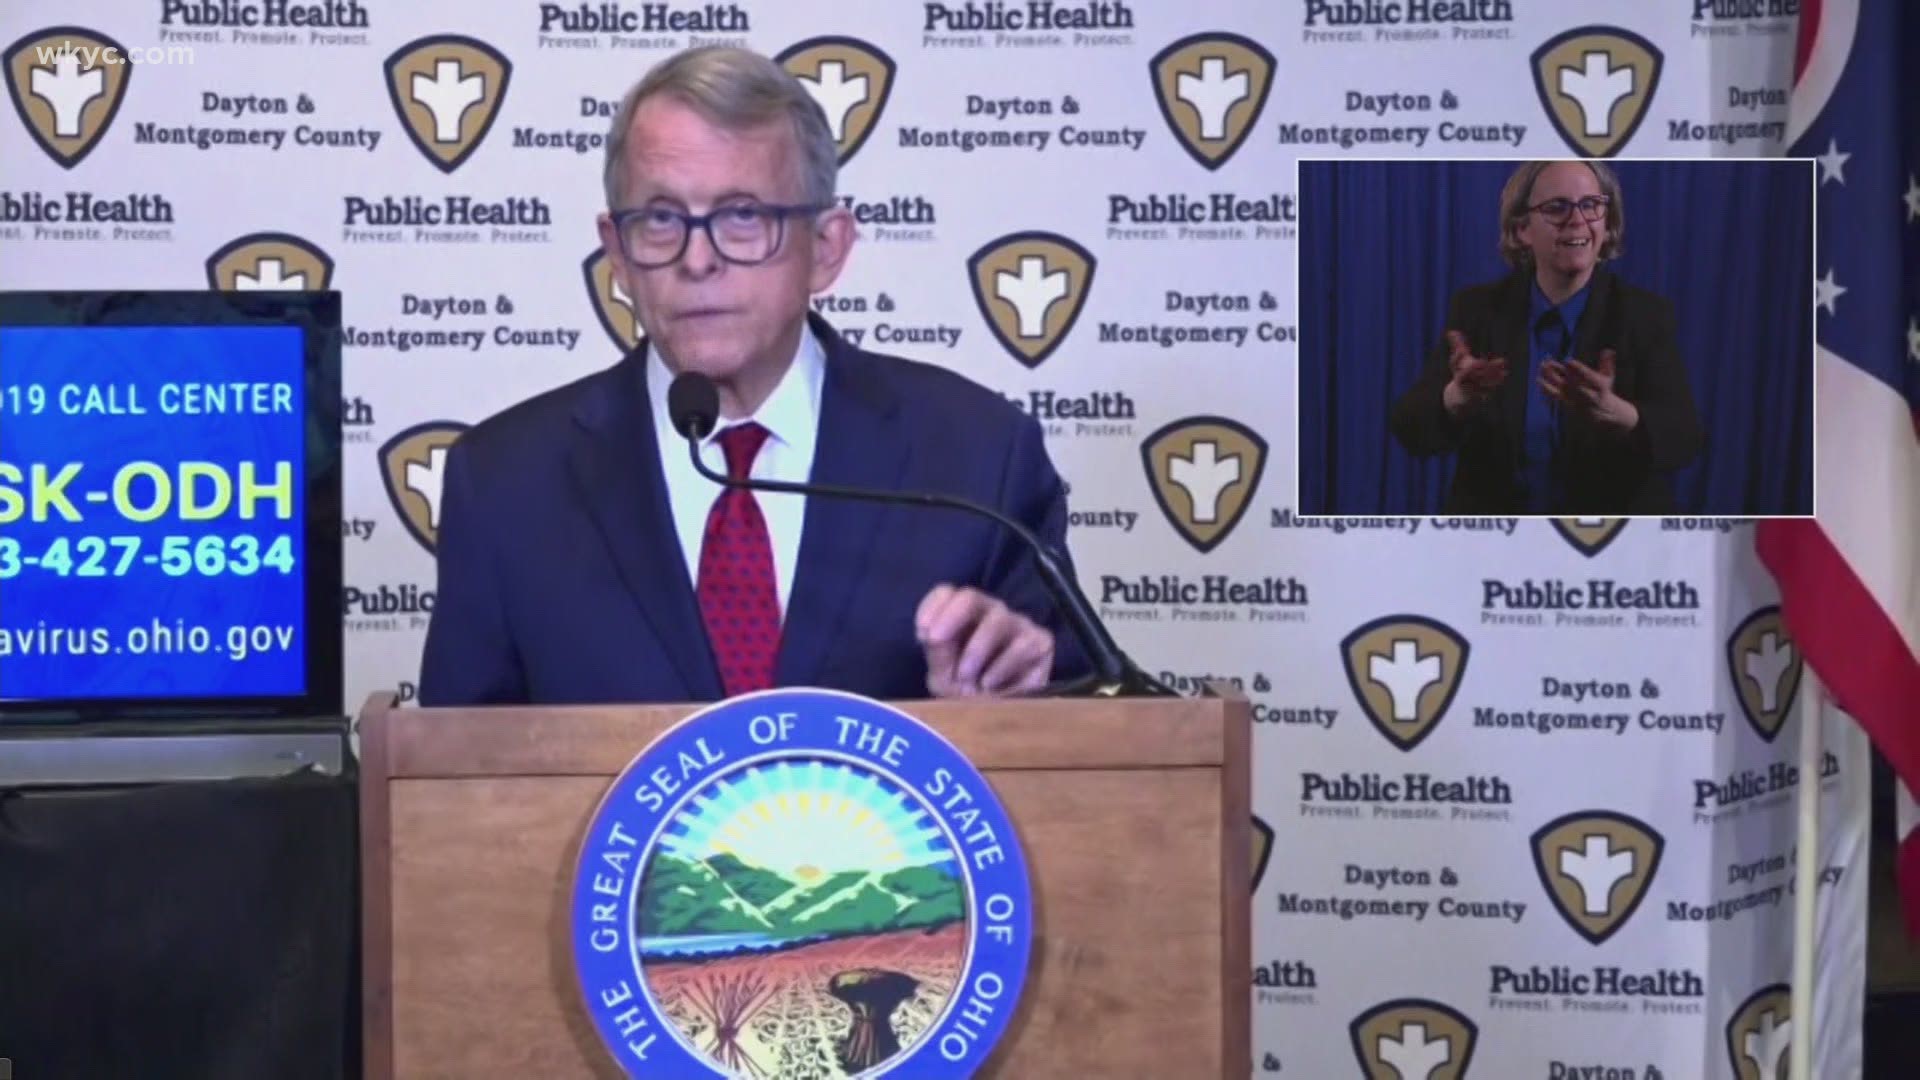 DeWine made the announcement during his COVID-19 briefing on Thursday. There is no word yet on how the appointment procedure will work.